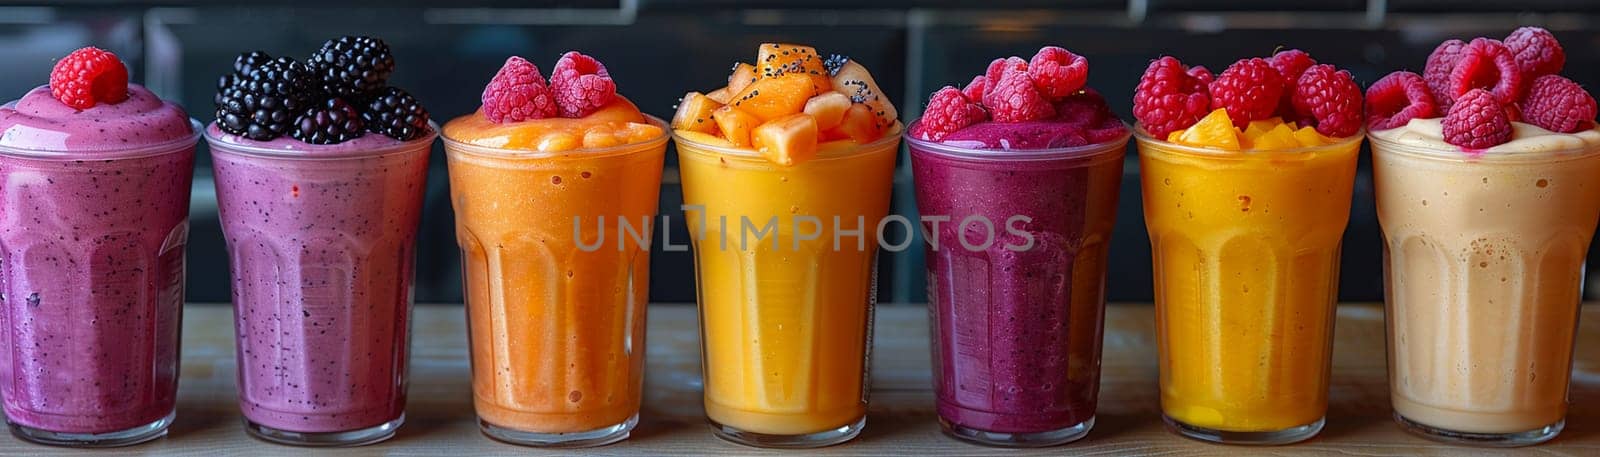 Smoothie Bar Blends Nutrition in Business of Health-Conscious Snacking, Blenders and fruits mix up a story of vitality and wellness in the food business.